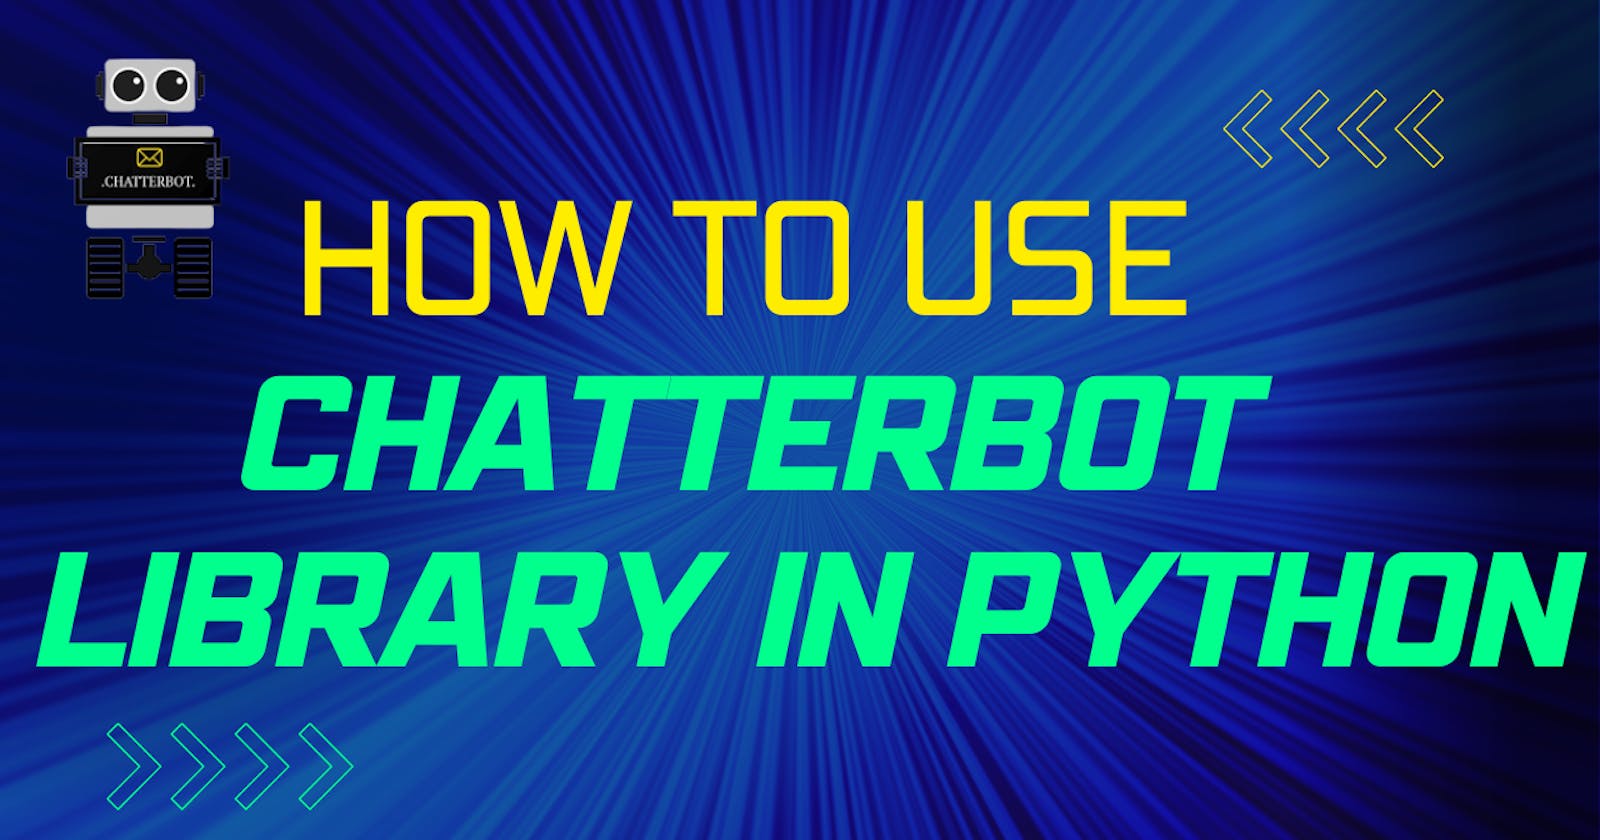 What is Chatterbot? How to use it!!